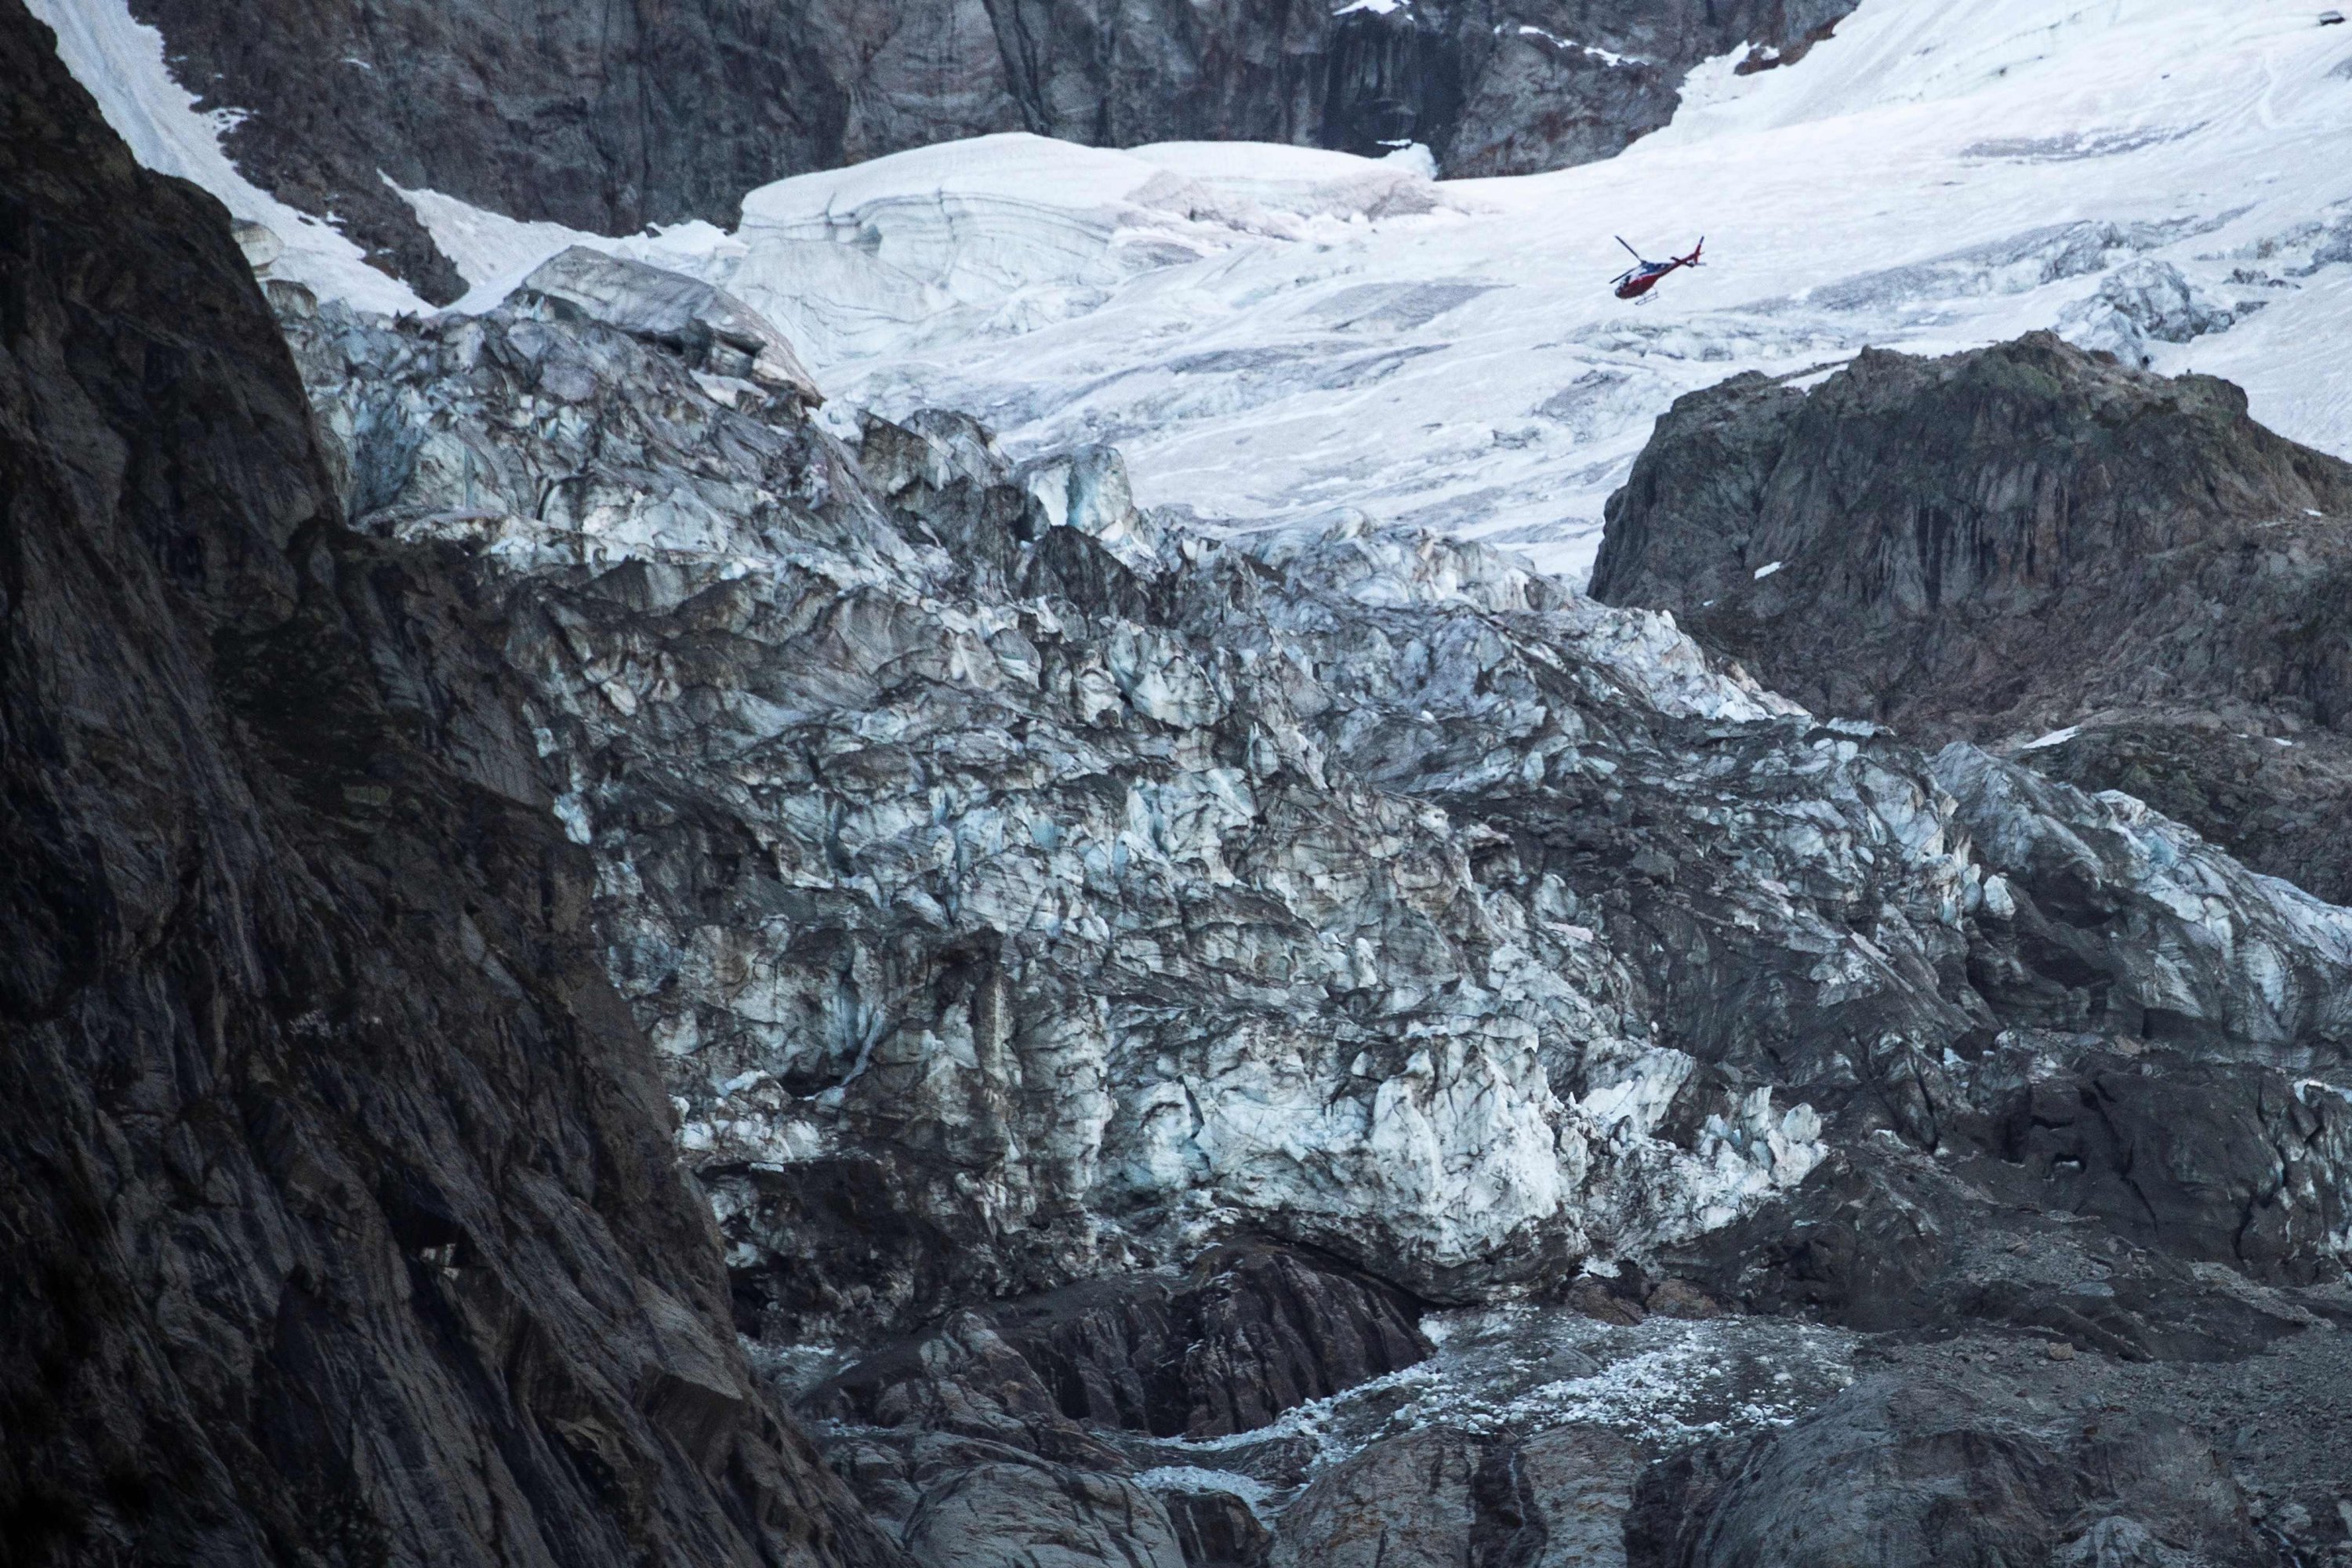 A helicopter flies above the Planpincieux glacier near the village of La Palud, in Courmayeur, Val Ferret, northwestern Italy, on Aug. 6, 2020. (AFP Photo)